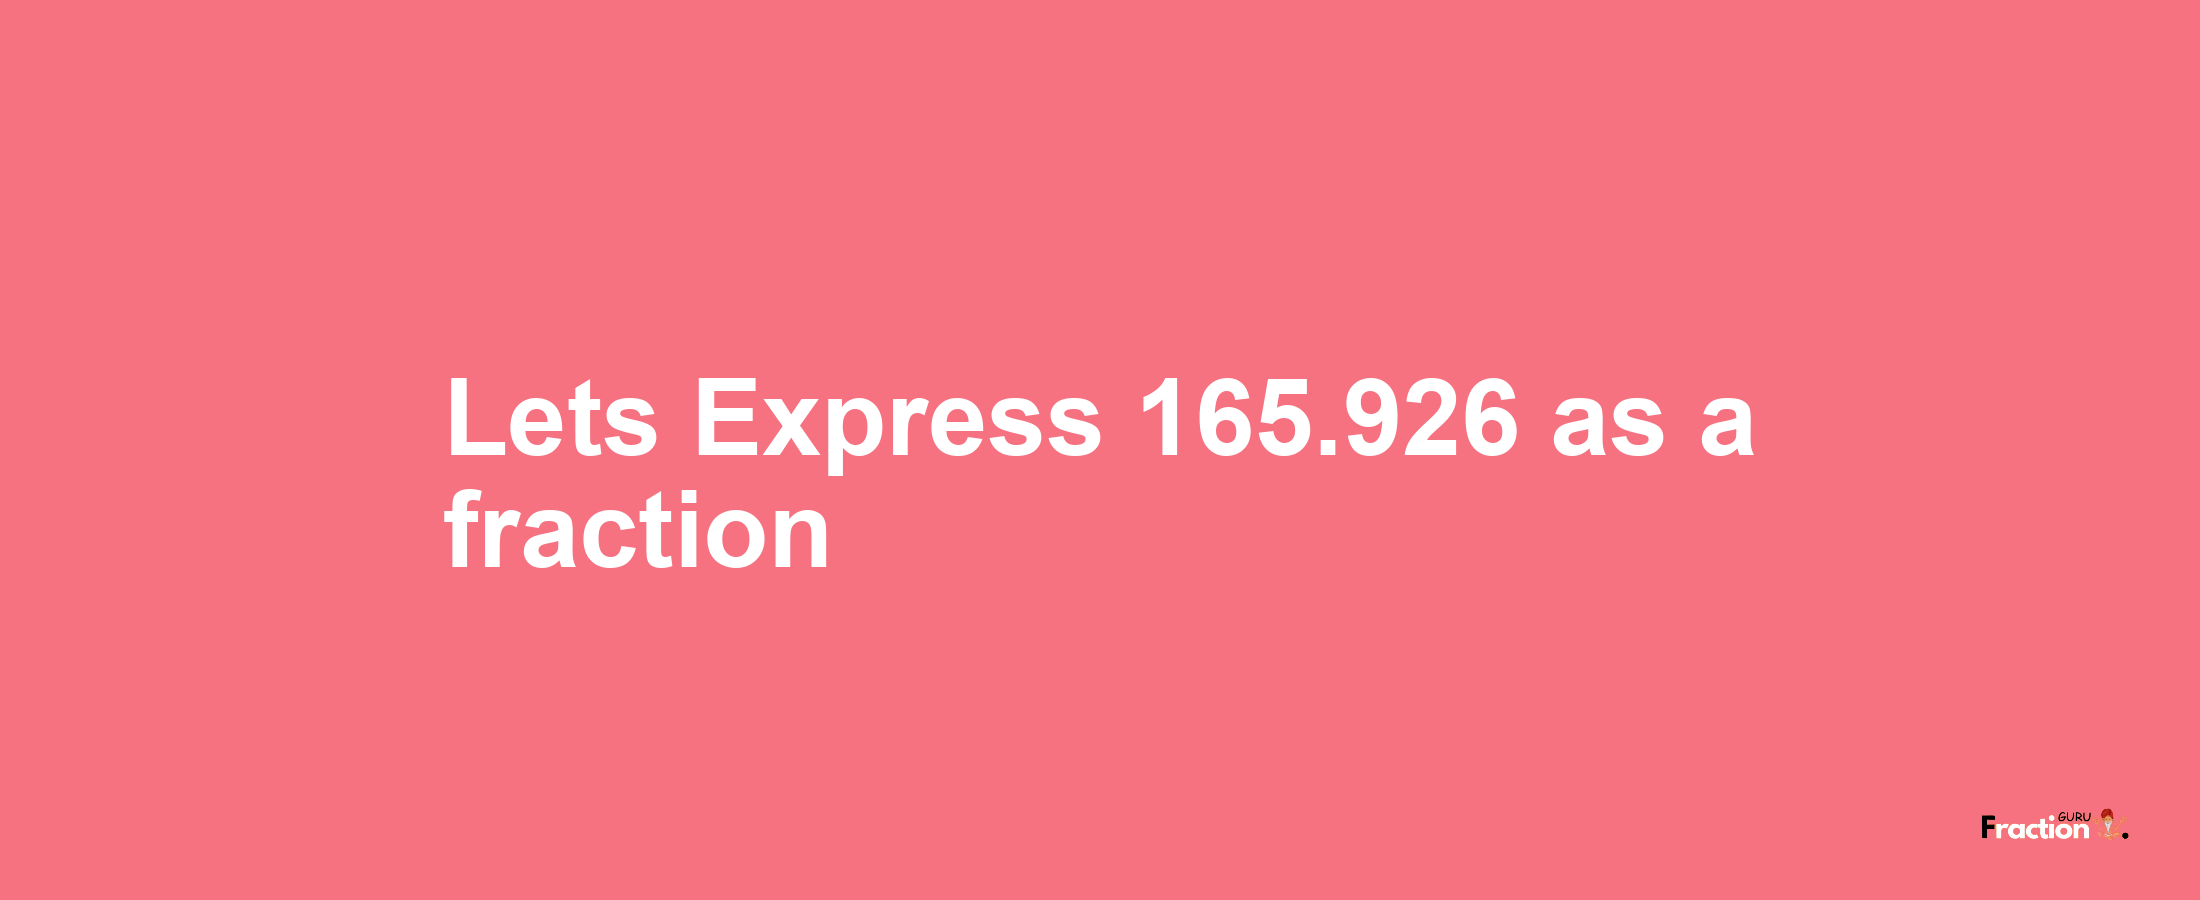 Lets Express 165.926 as afraction